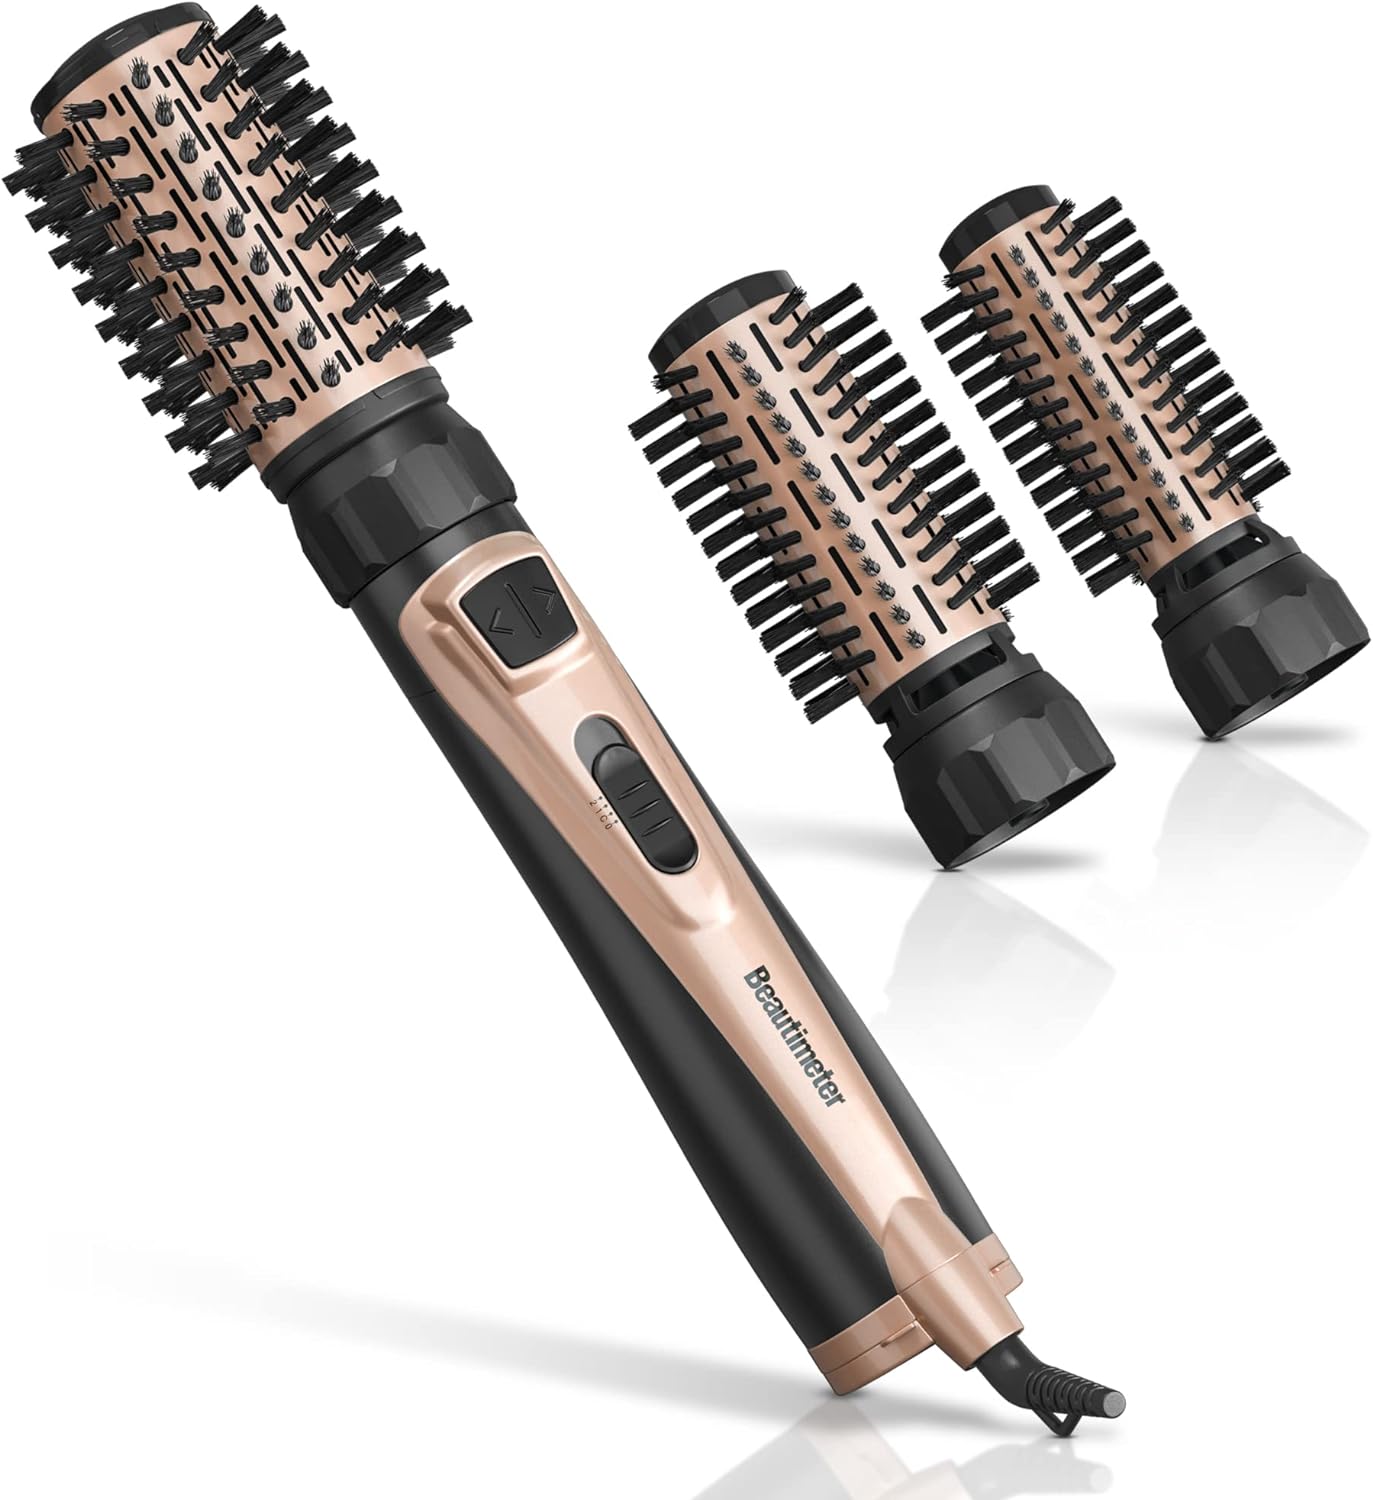 Beautimeter 3-in-1 Hair Dryer Brush with Auto-Rotating Curling, Frizz Control, Negative Ionic Volumizer - Black & Gold